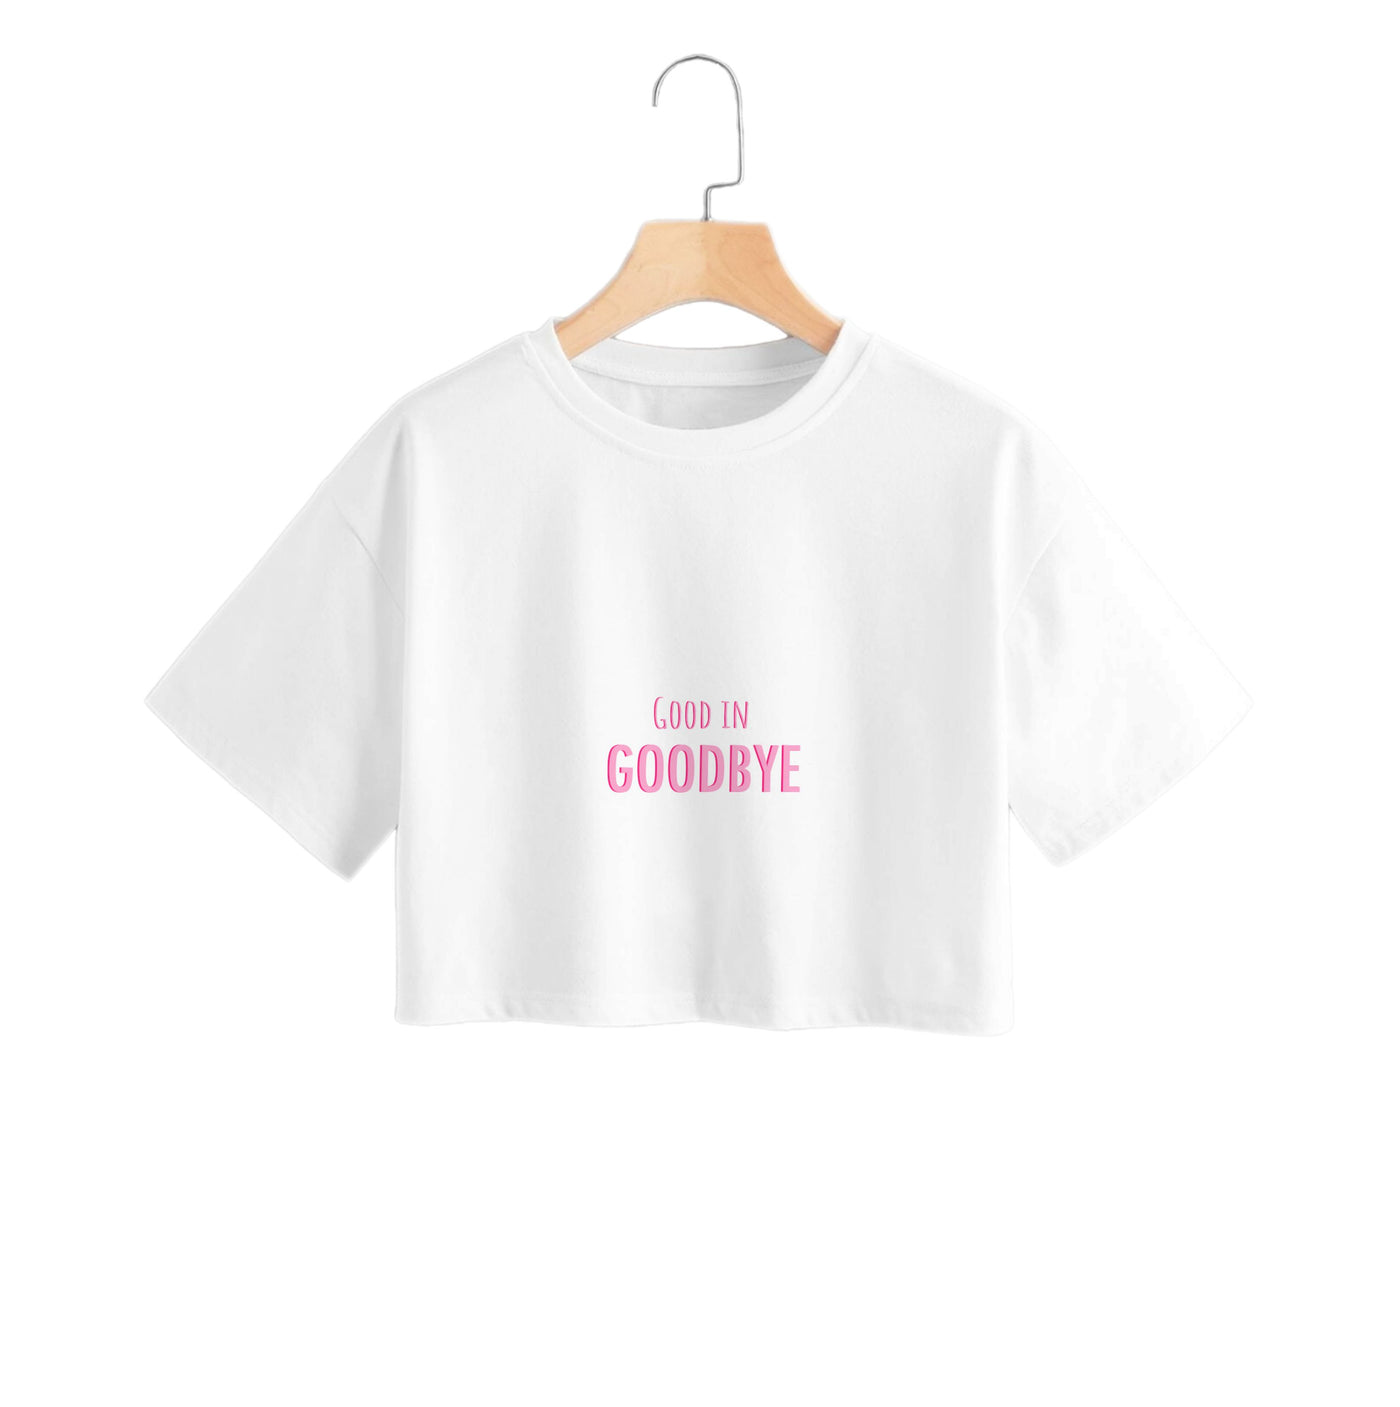 Good In Goodbye - Maddison Beer Crop Top